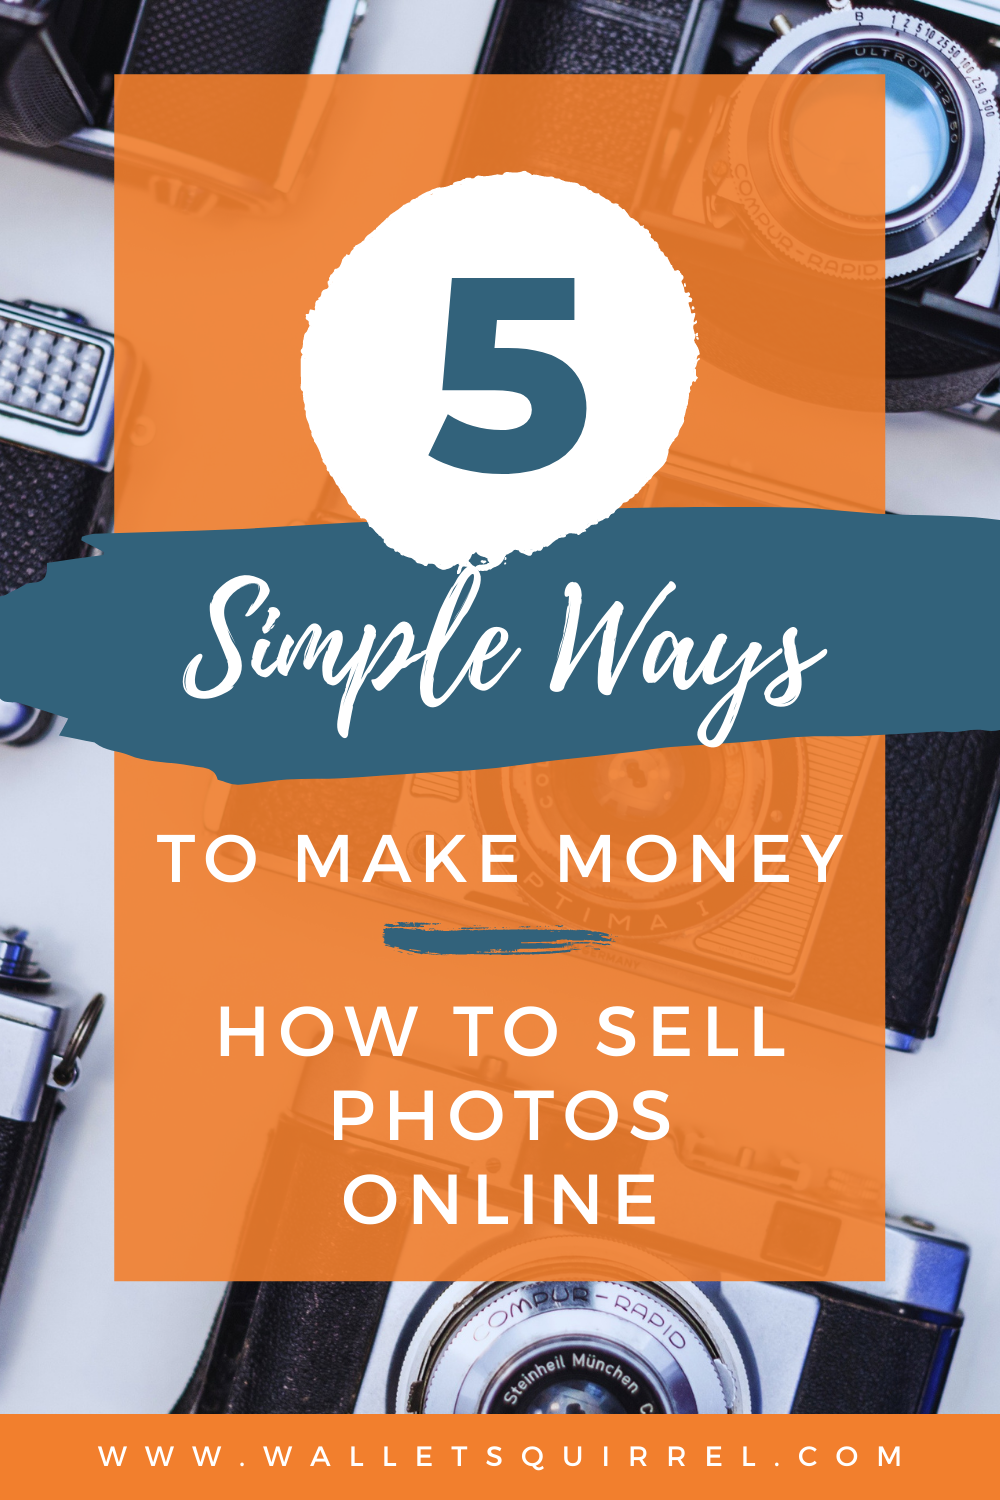 5 Simple Ways – How to Sell Photos Online